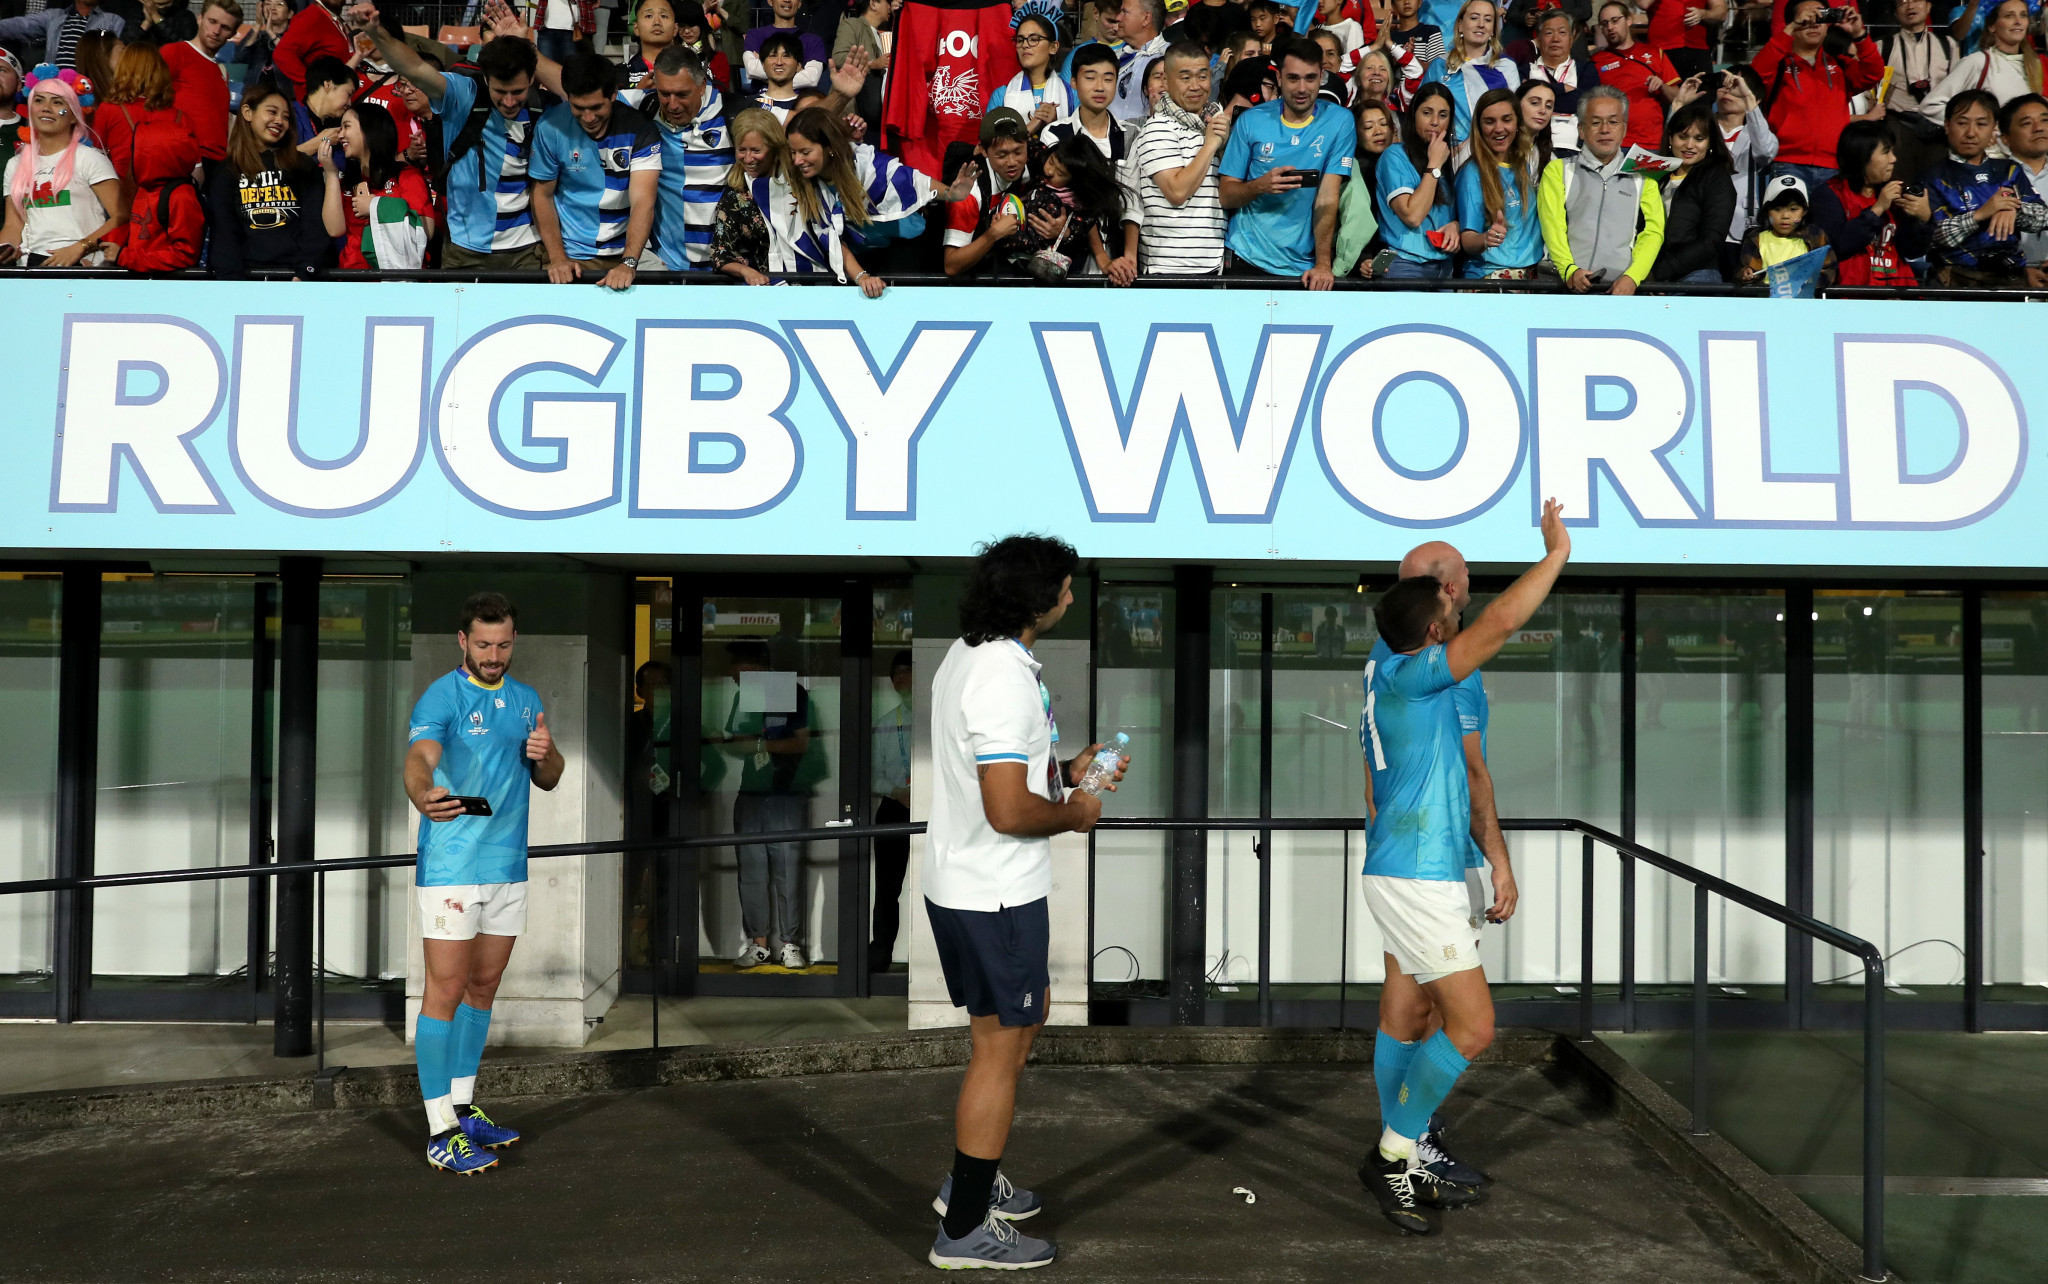 Uruguay represented at World Rugby Council meeting for first time